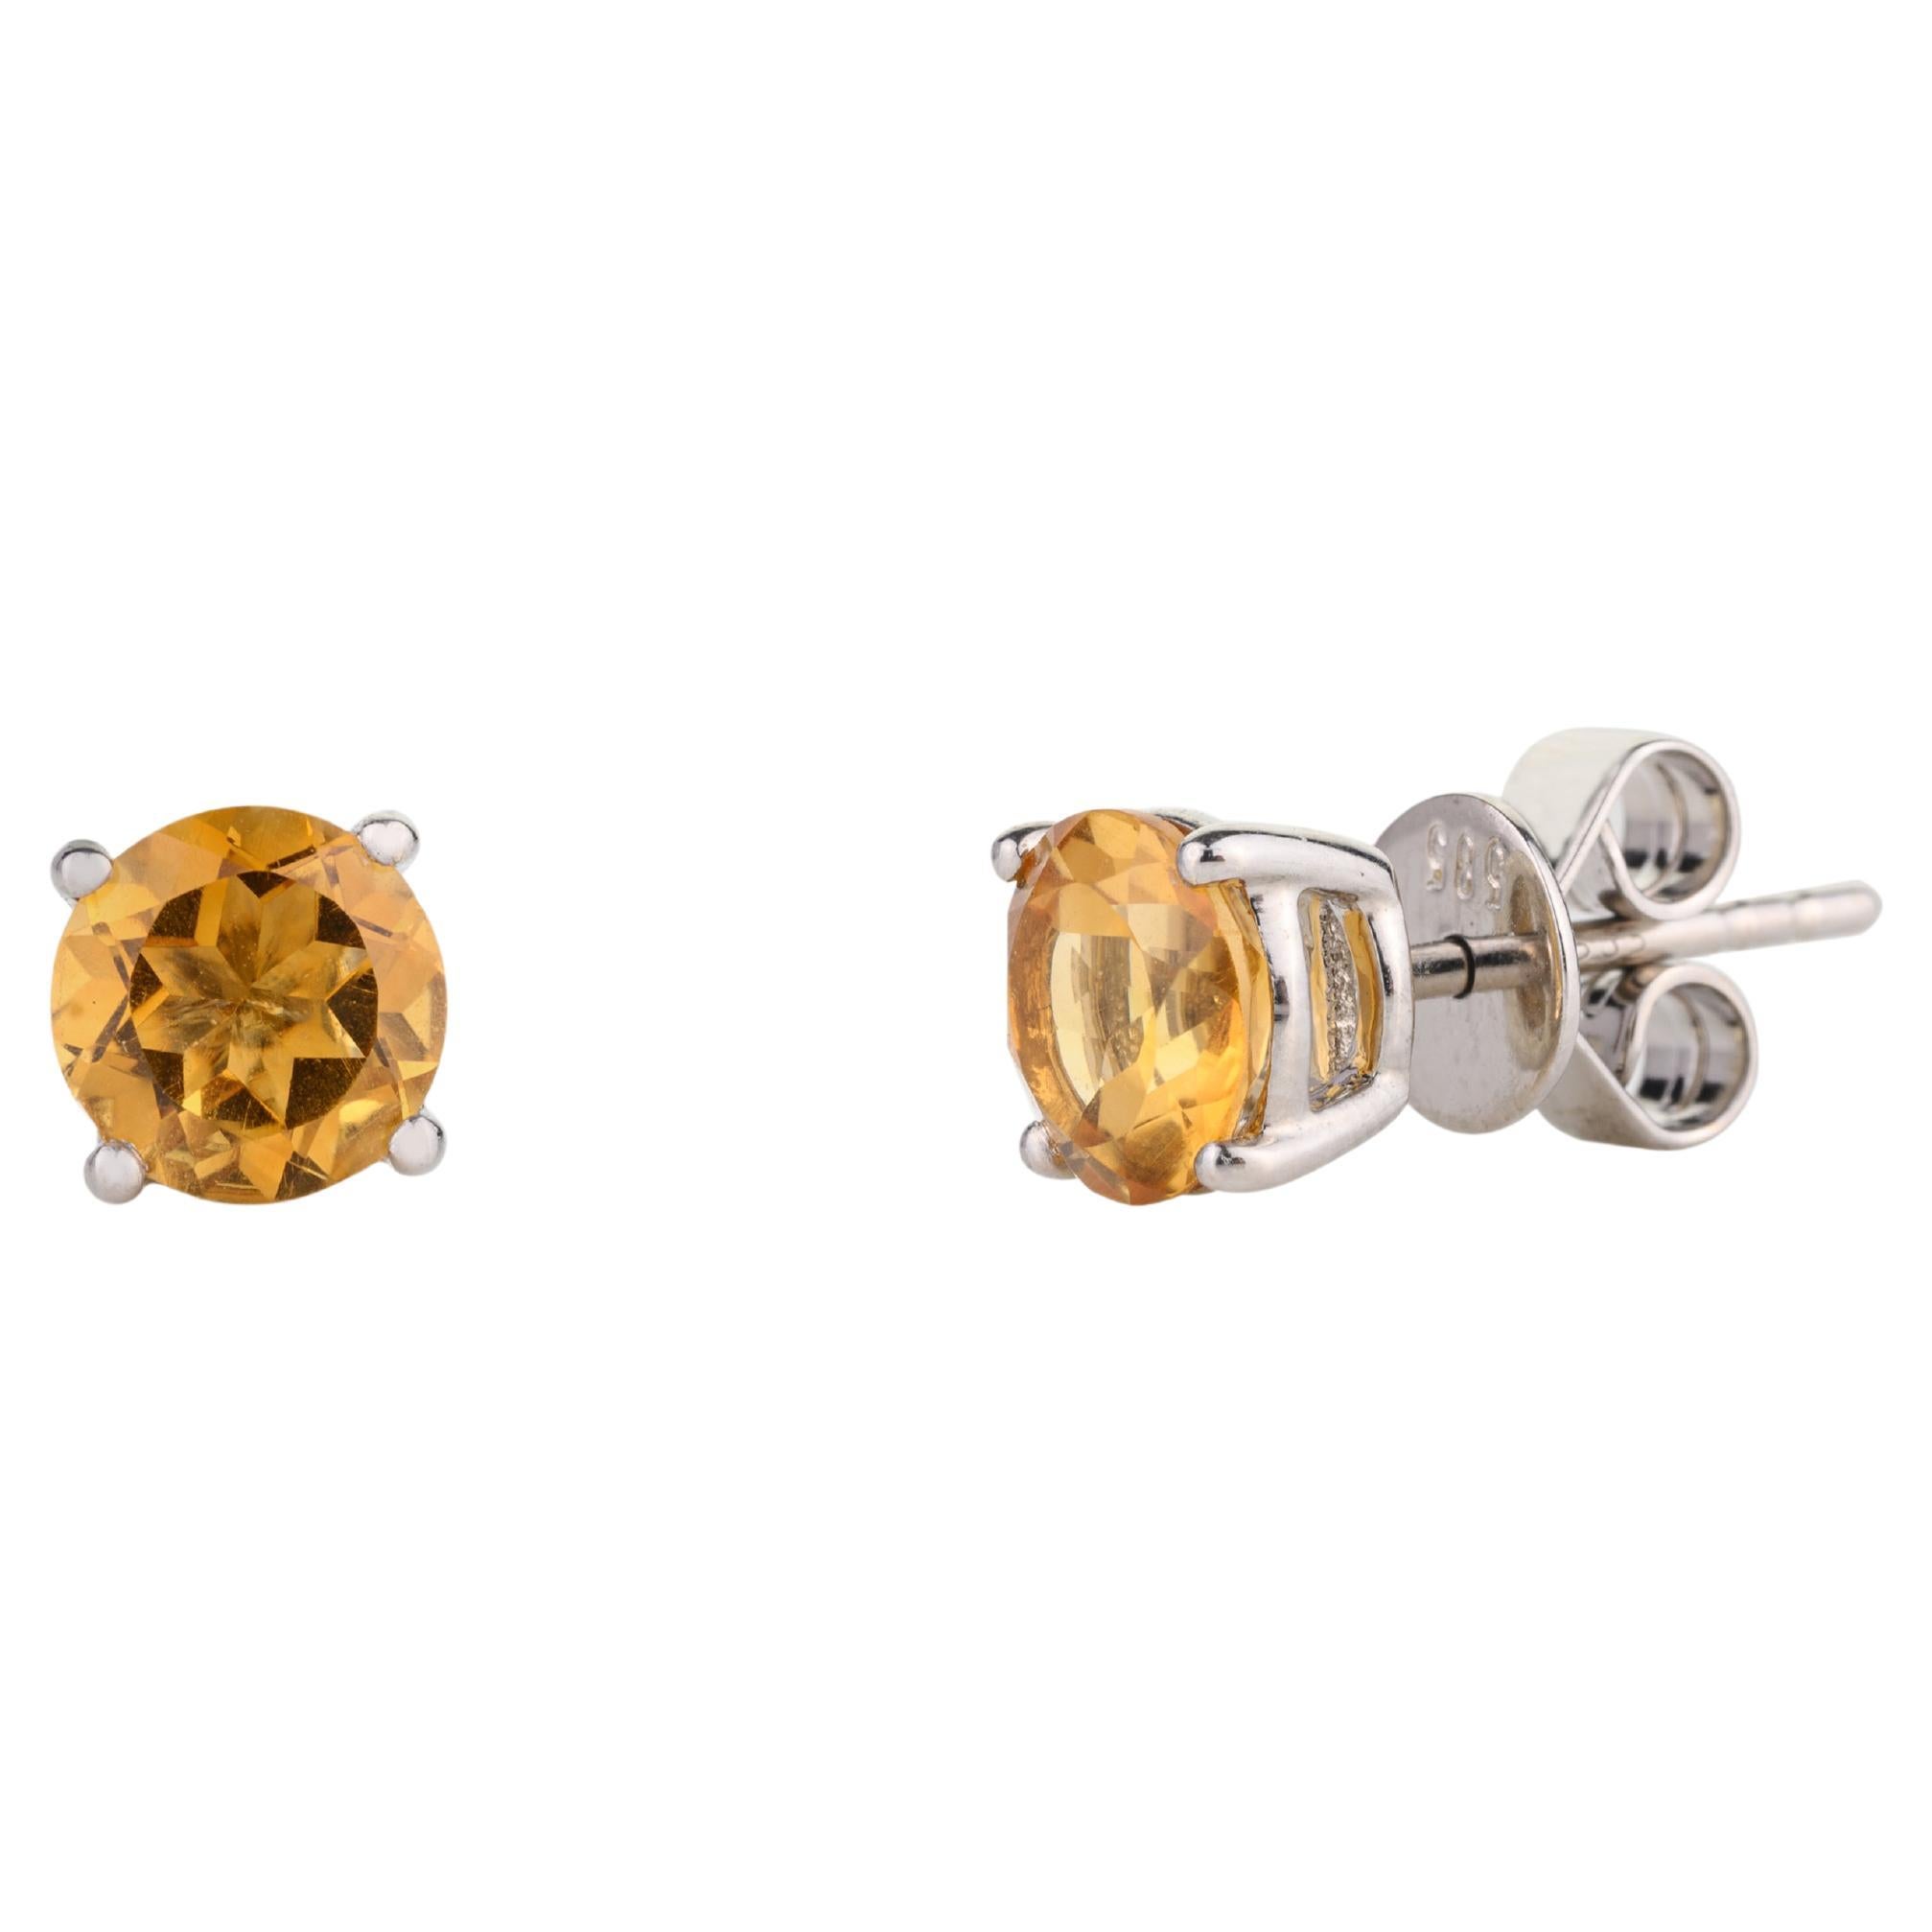 Faceted Citrine Solitaire Stud Earrings in 14k White Gold Gift for Her For Sale